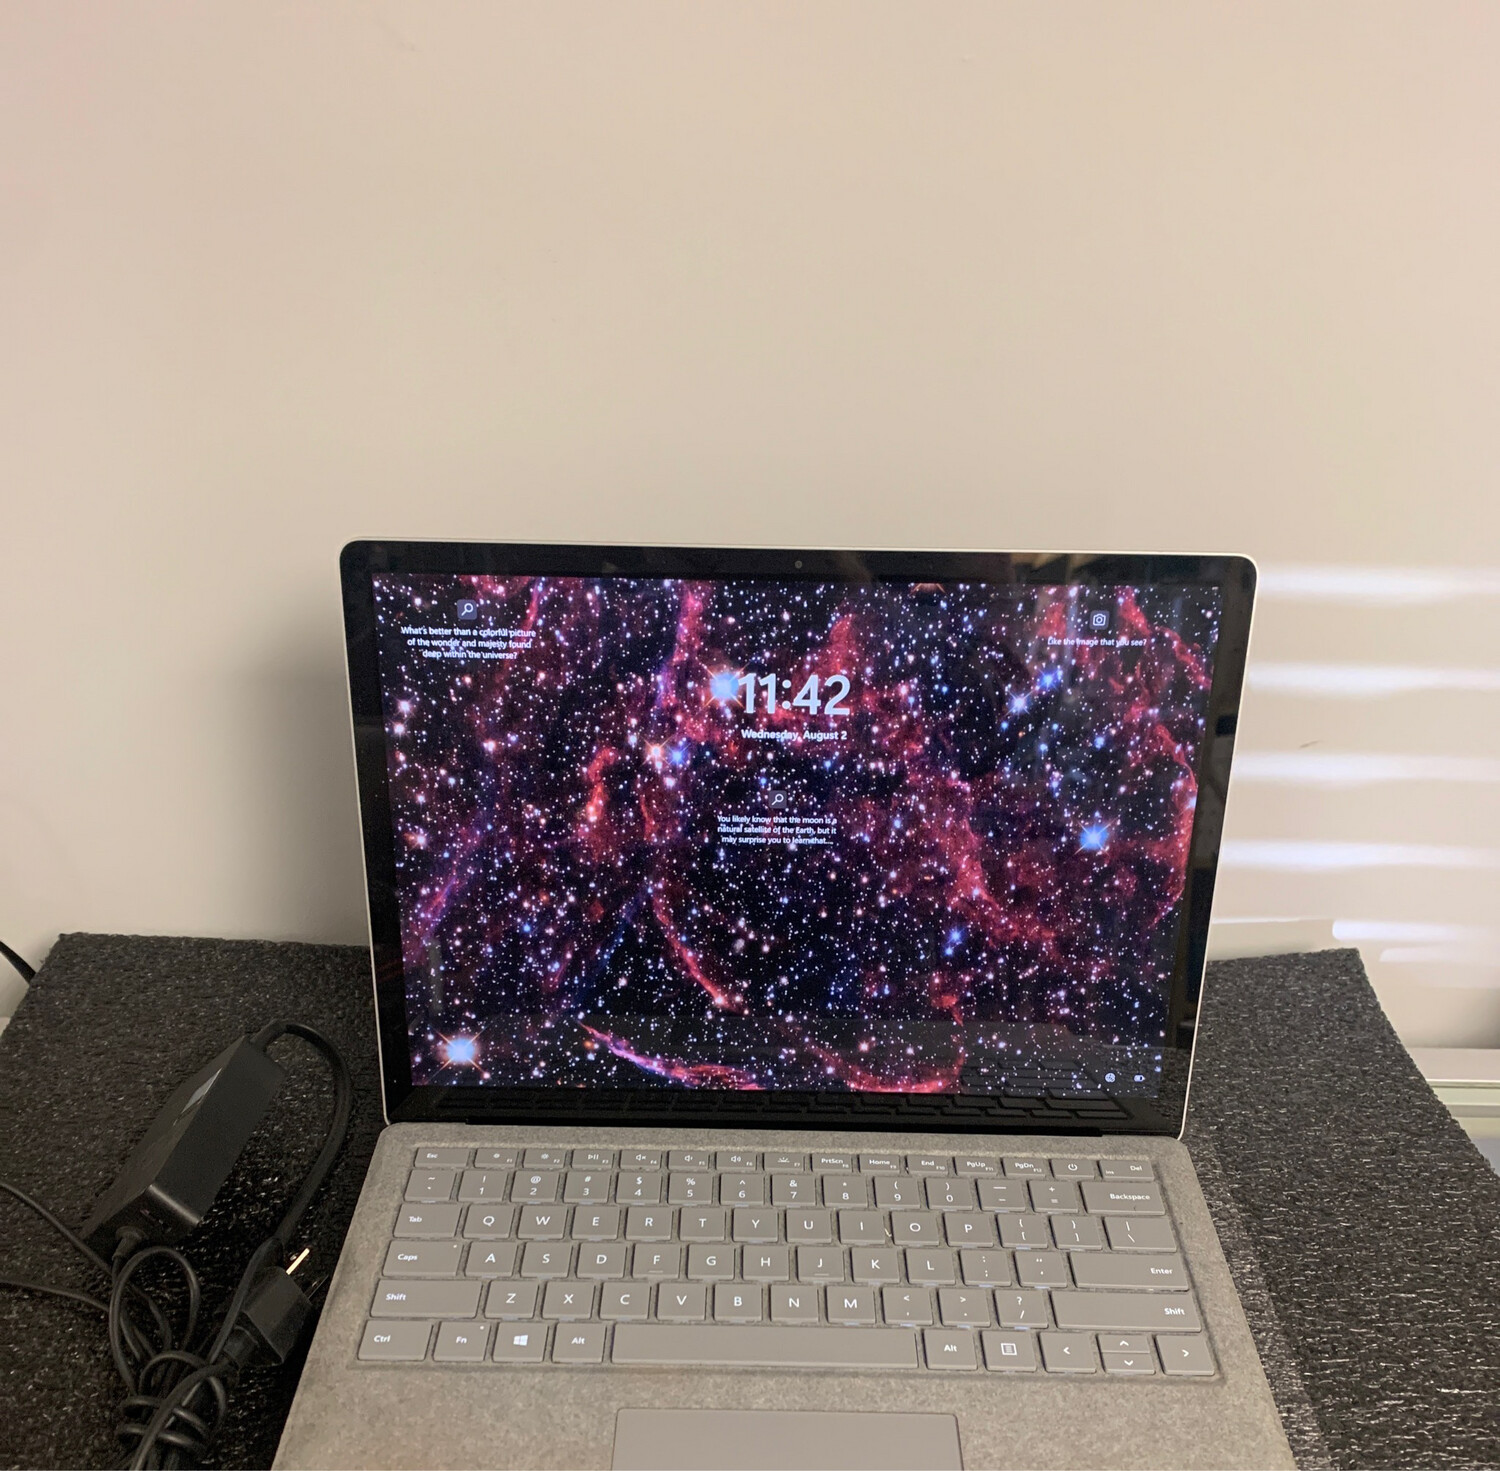 MS Surface Laptop 13.5” Touch Core I5 7th Gen 128 GB 4 GB ….